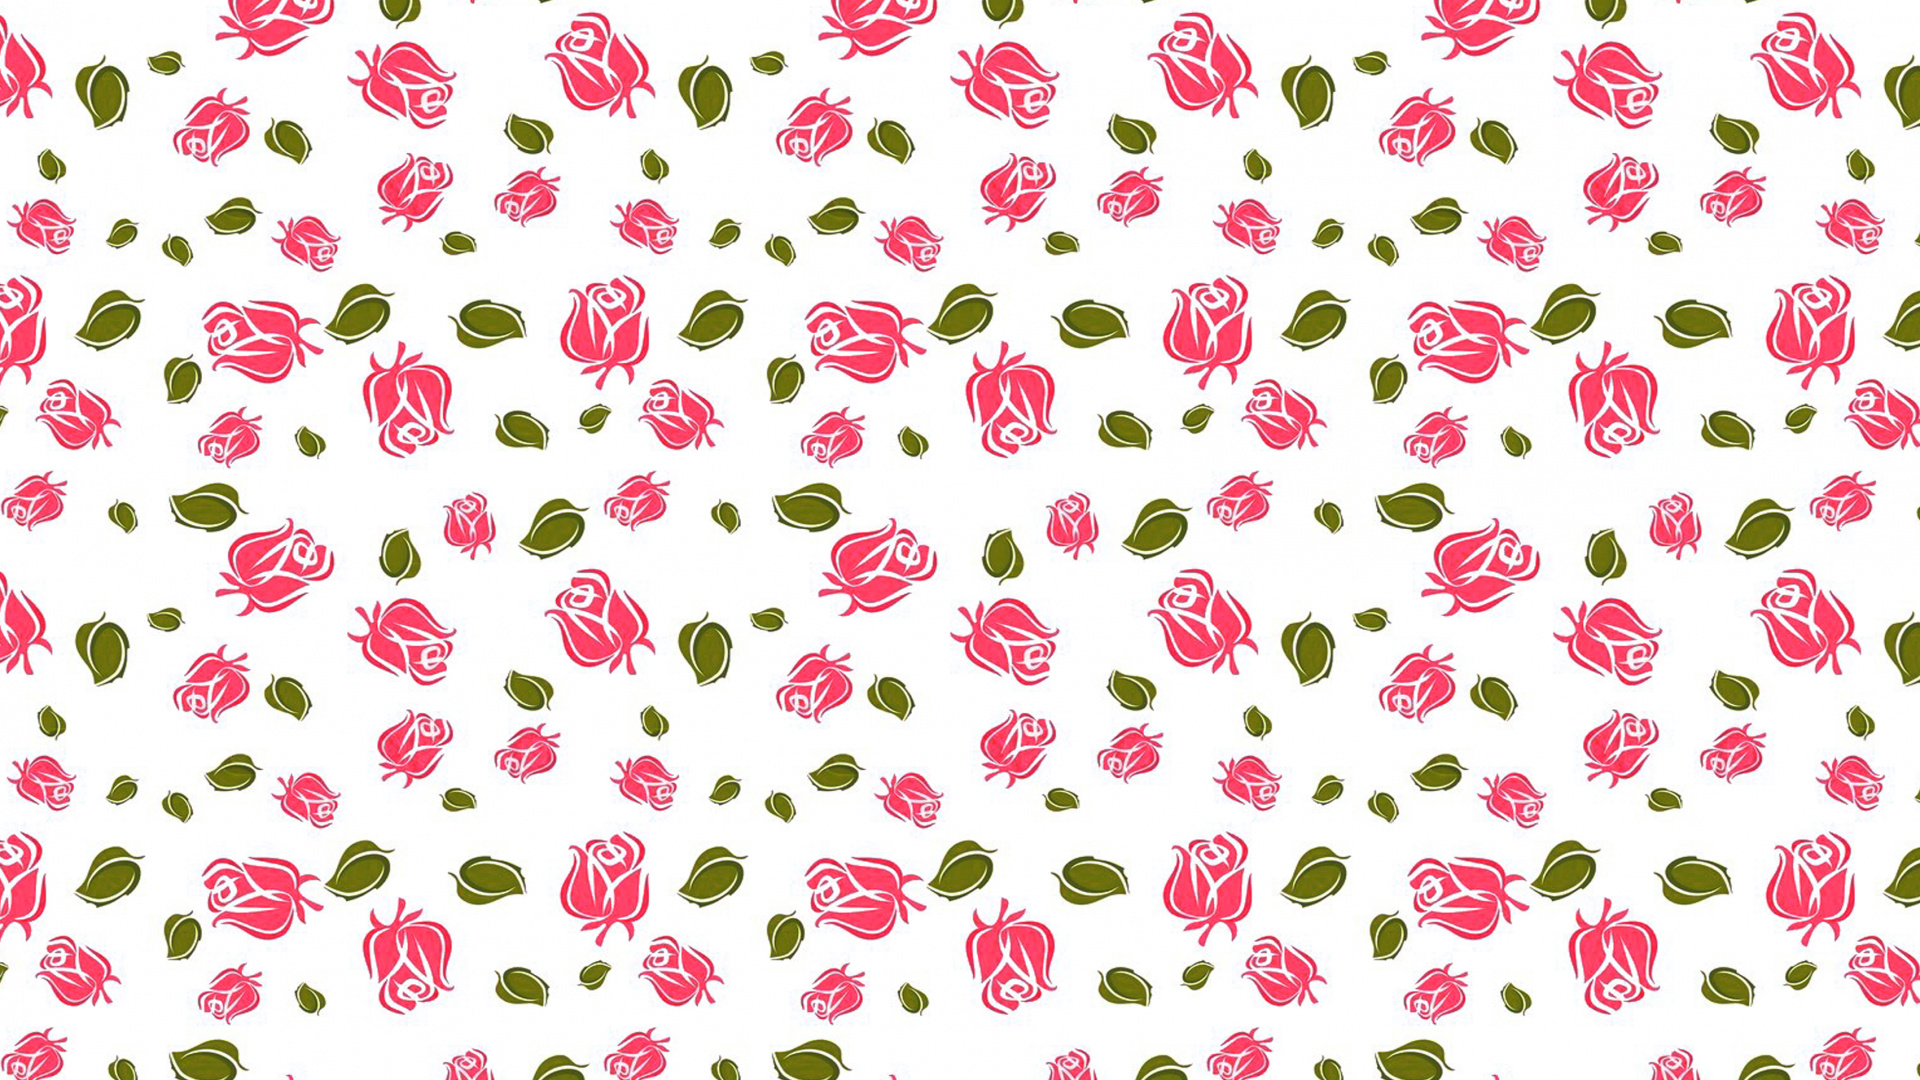 White Pink and Green Hearts and Hearts Illustration. Wallpaper in 1920x1080 Resolution